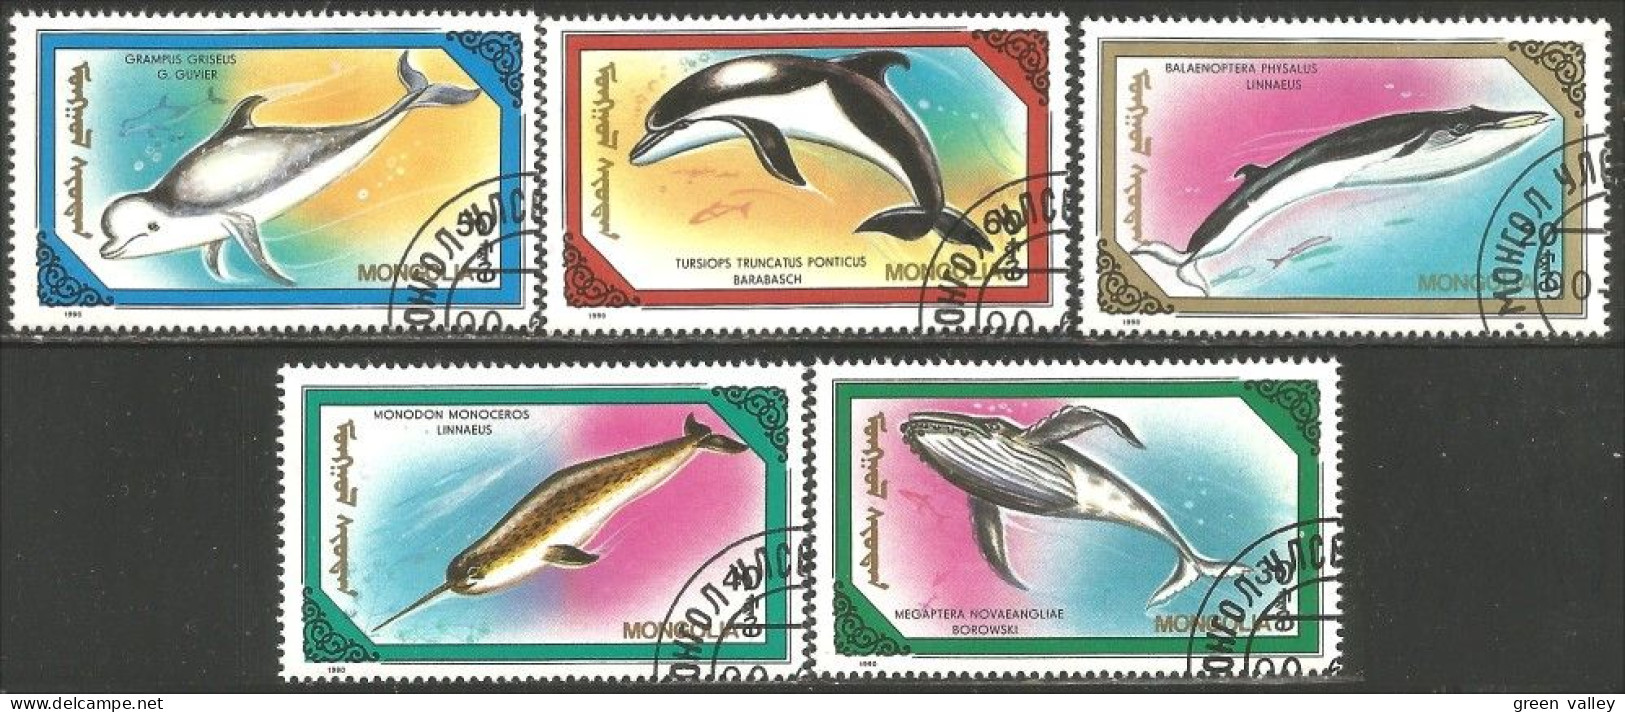 620 Mongolie Baleines Whales Cachalots Balena Capodoglio Ballena Wal Pottwal Dauphins Dolphins Delphin (MNG-76) - Whales